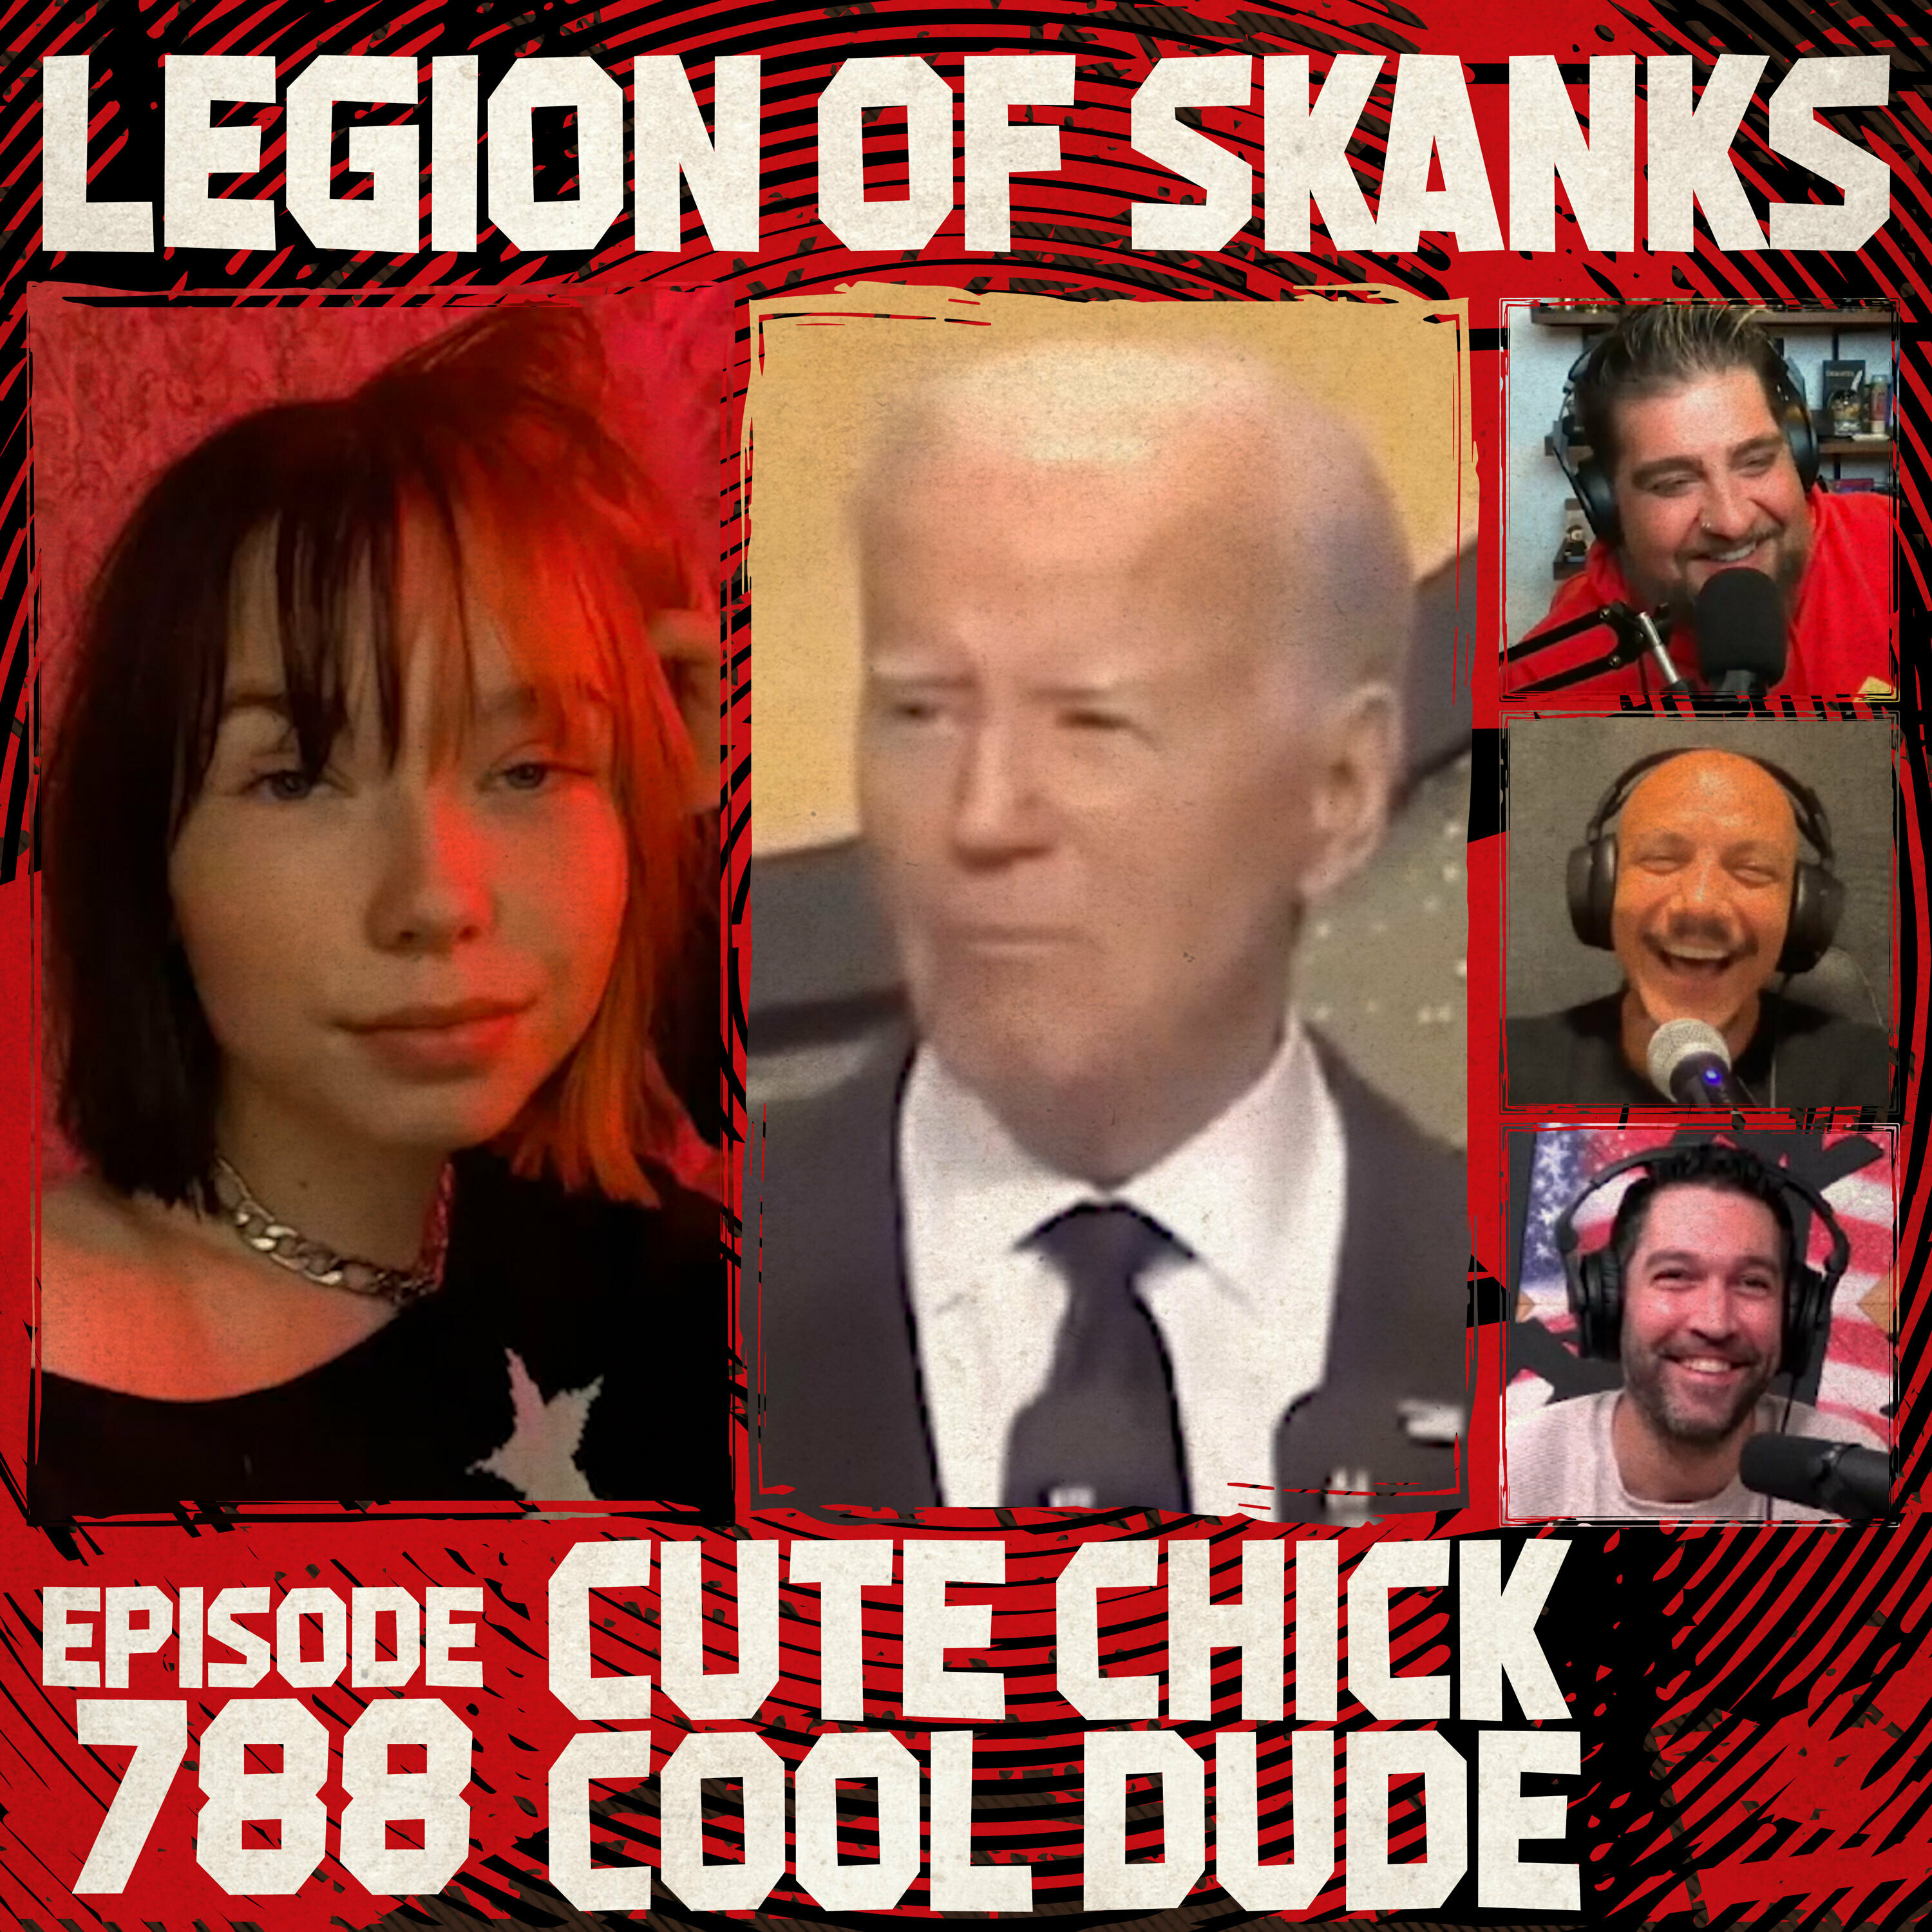 Episode #788 - Cute Chick, Cool Dude